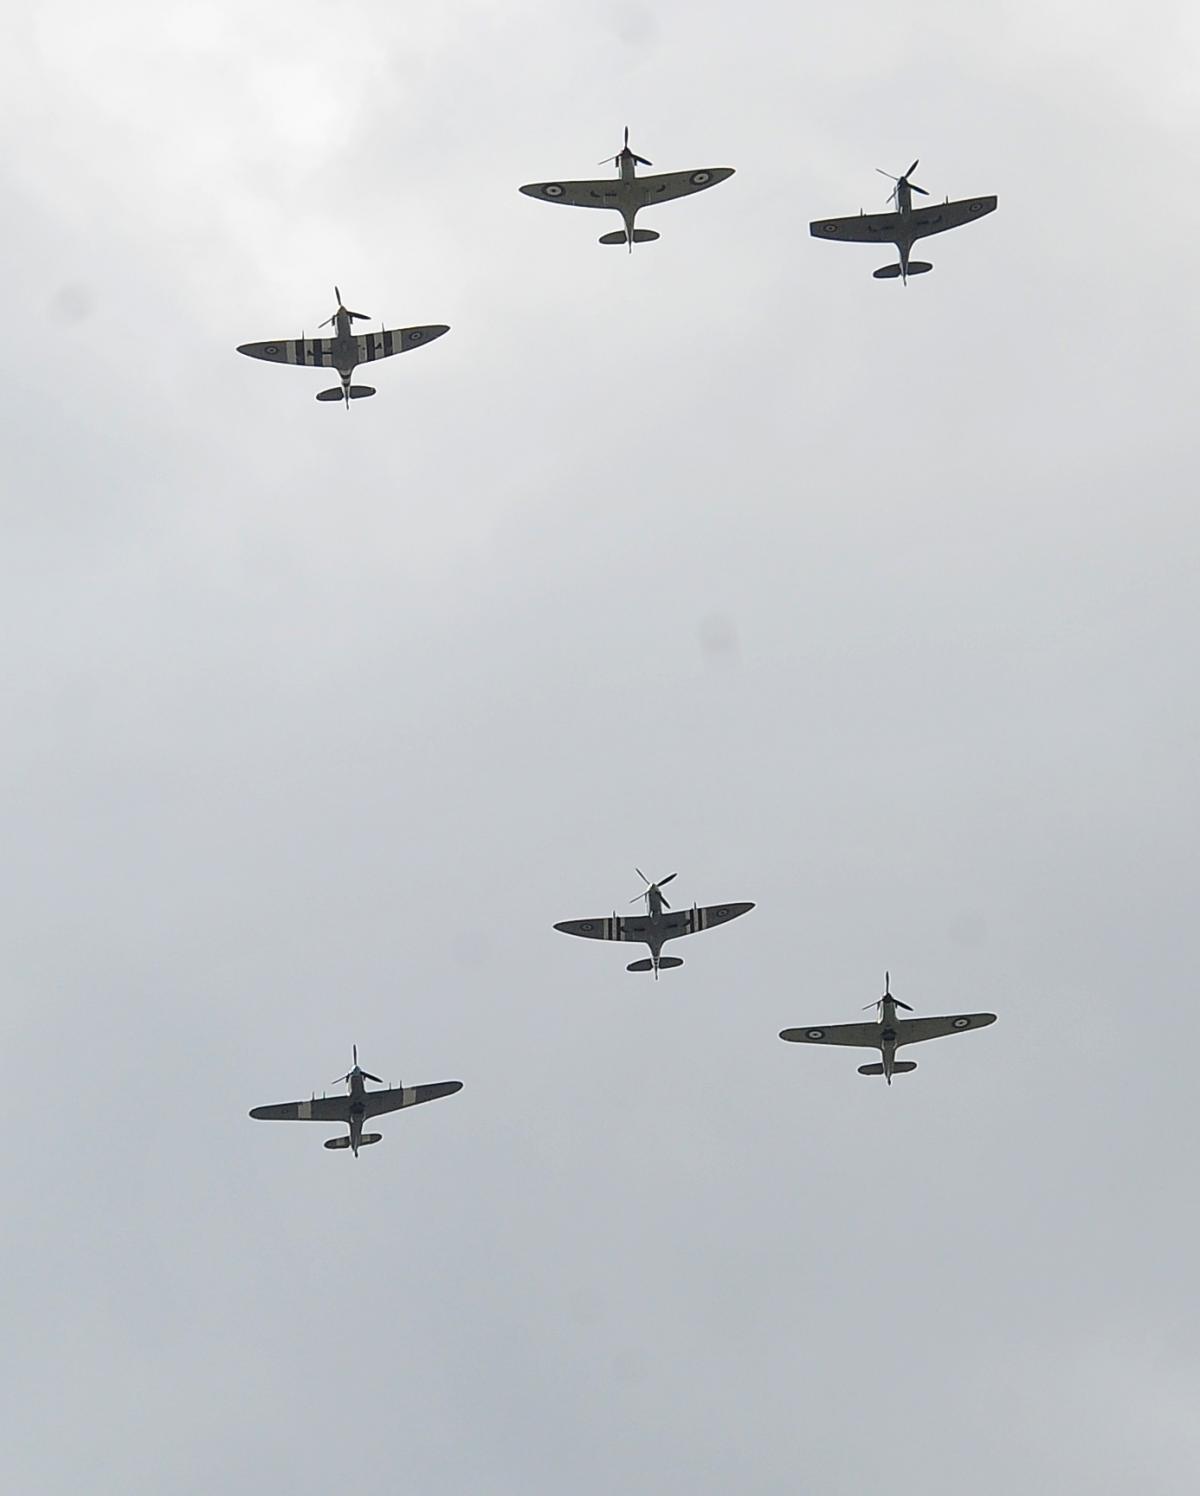 The flypast over Radnor Street Cemetery on Battle of Britain Day